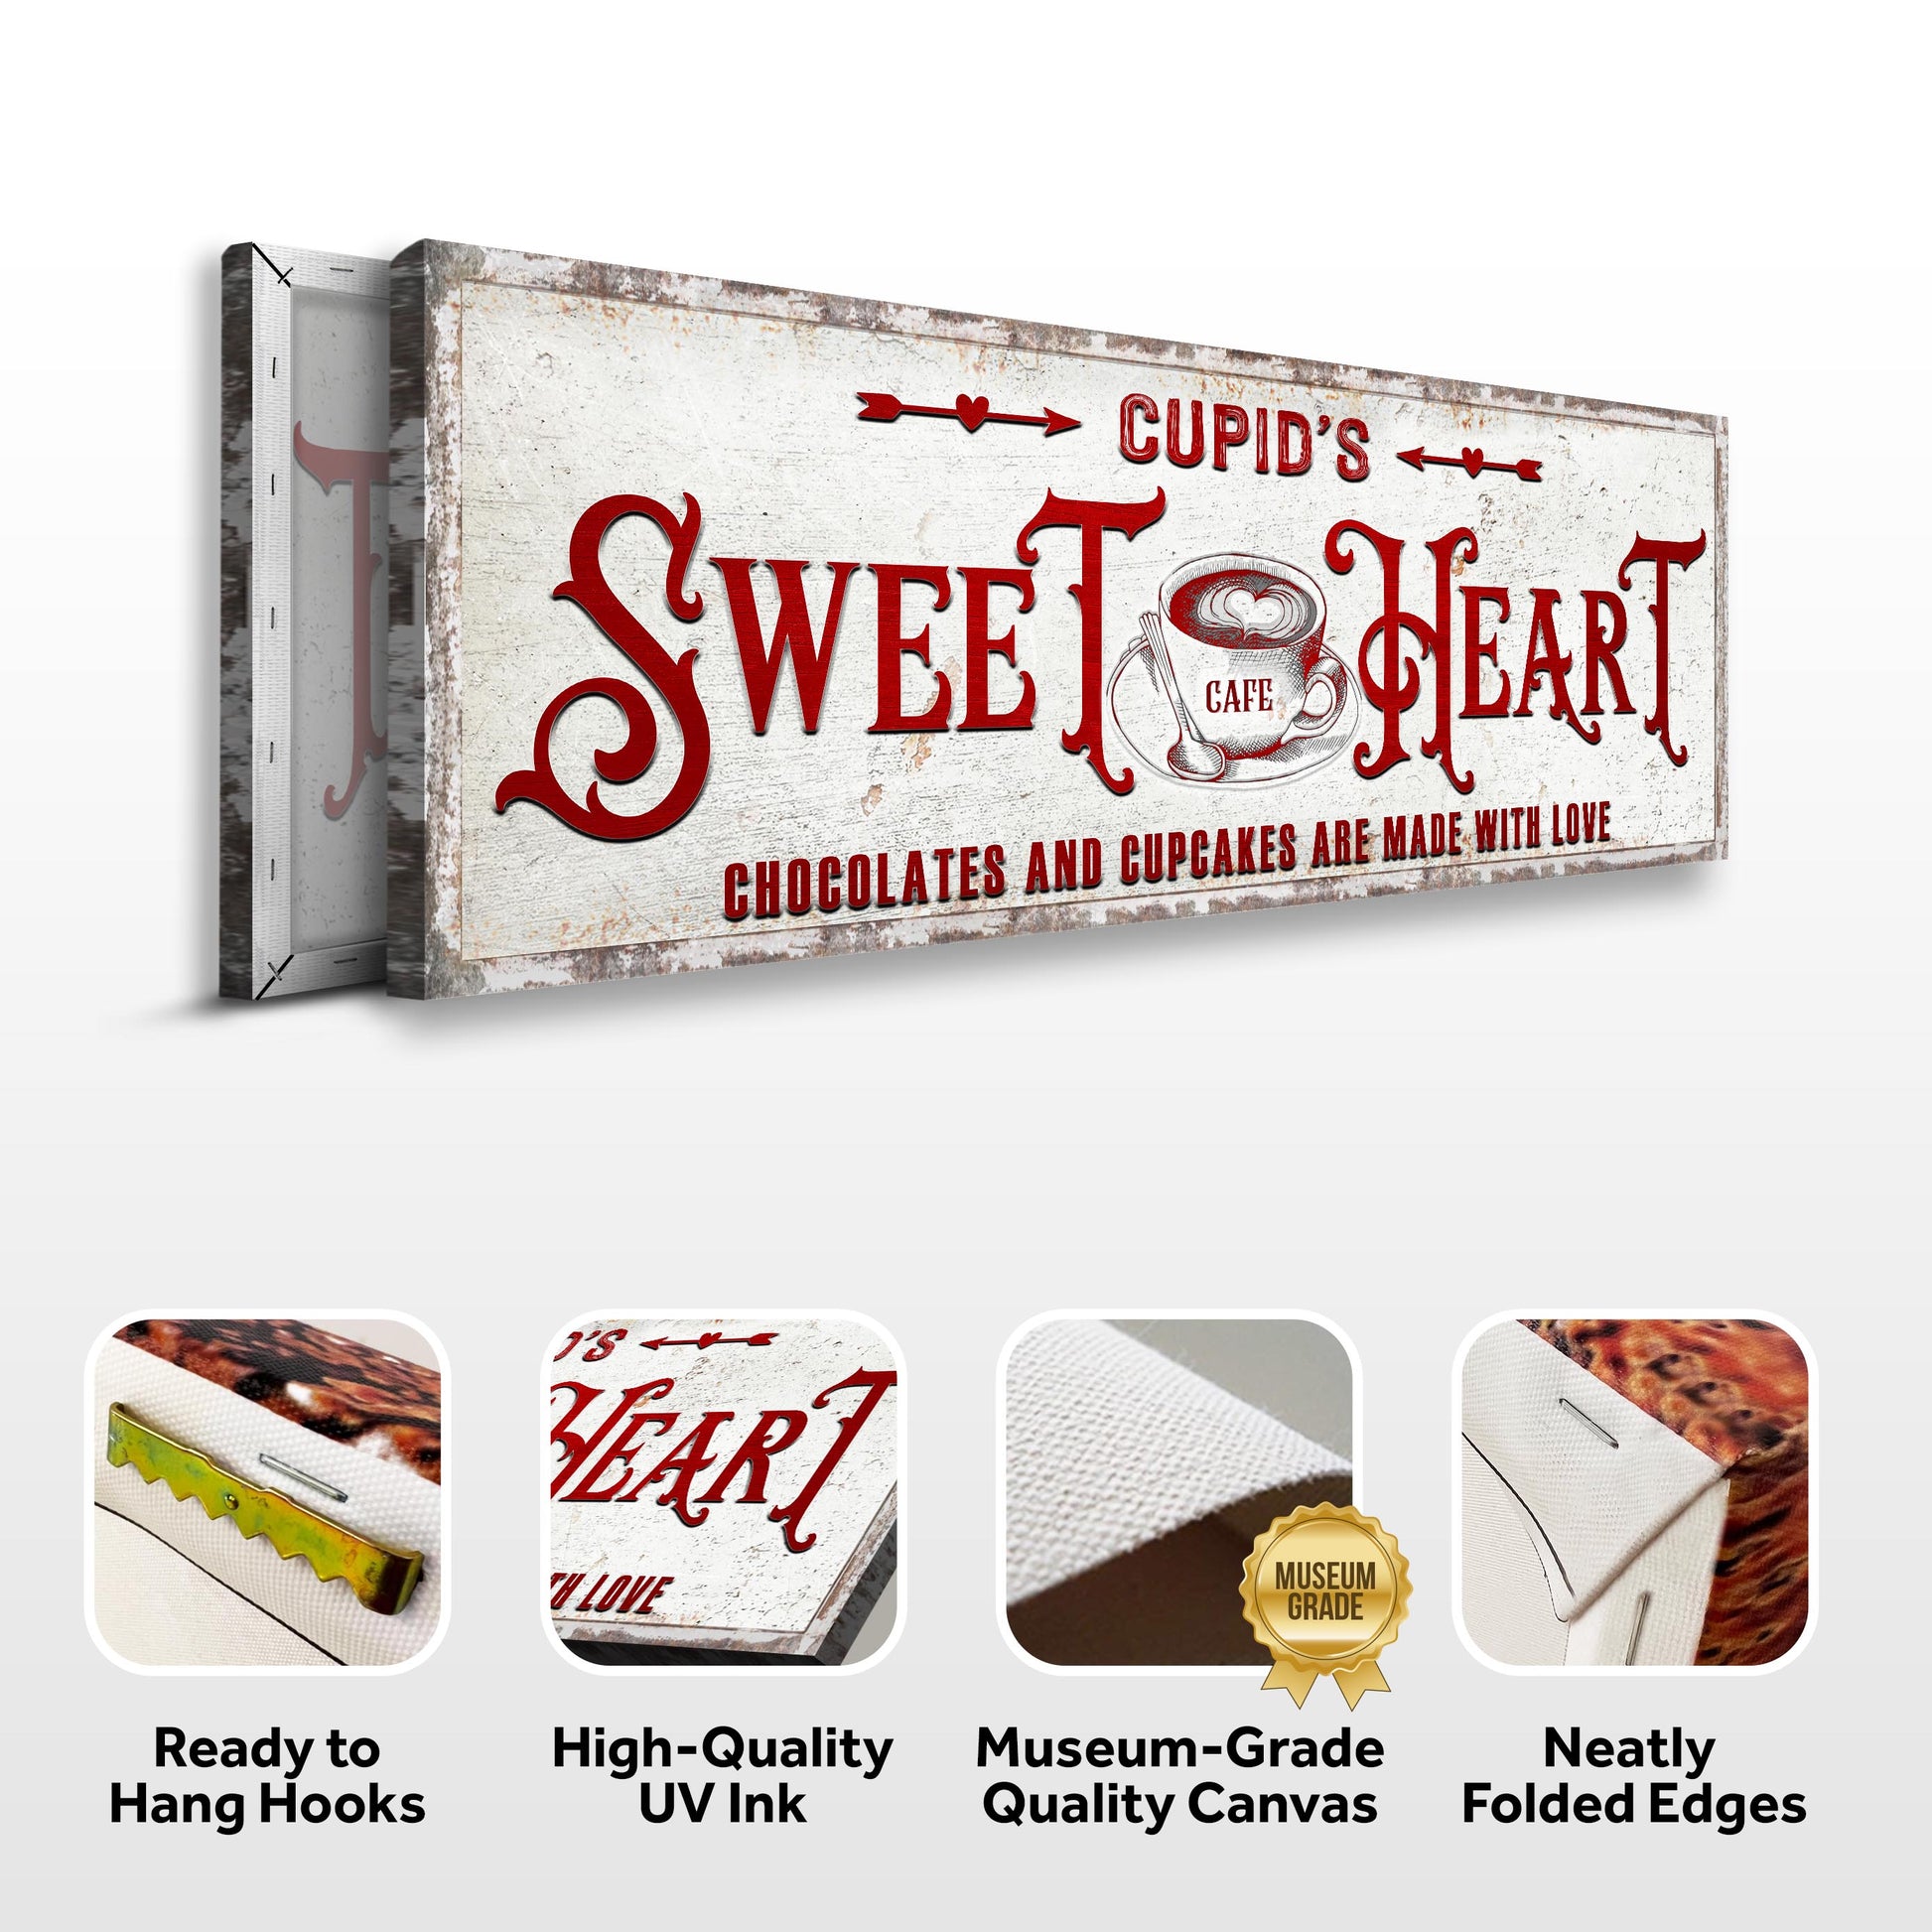 Rustic Cupid's Sweetheart Vintage Sign Specs - Image by Tailored Canvases